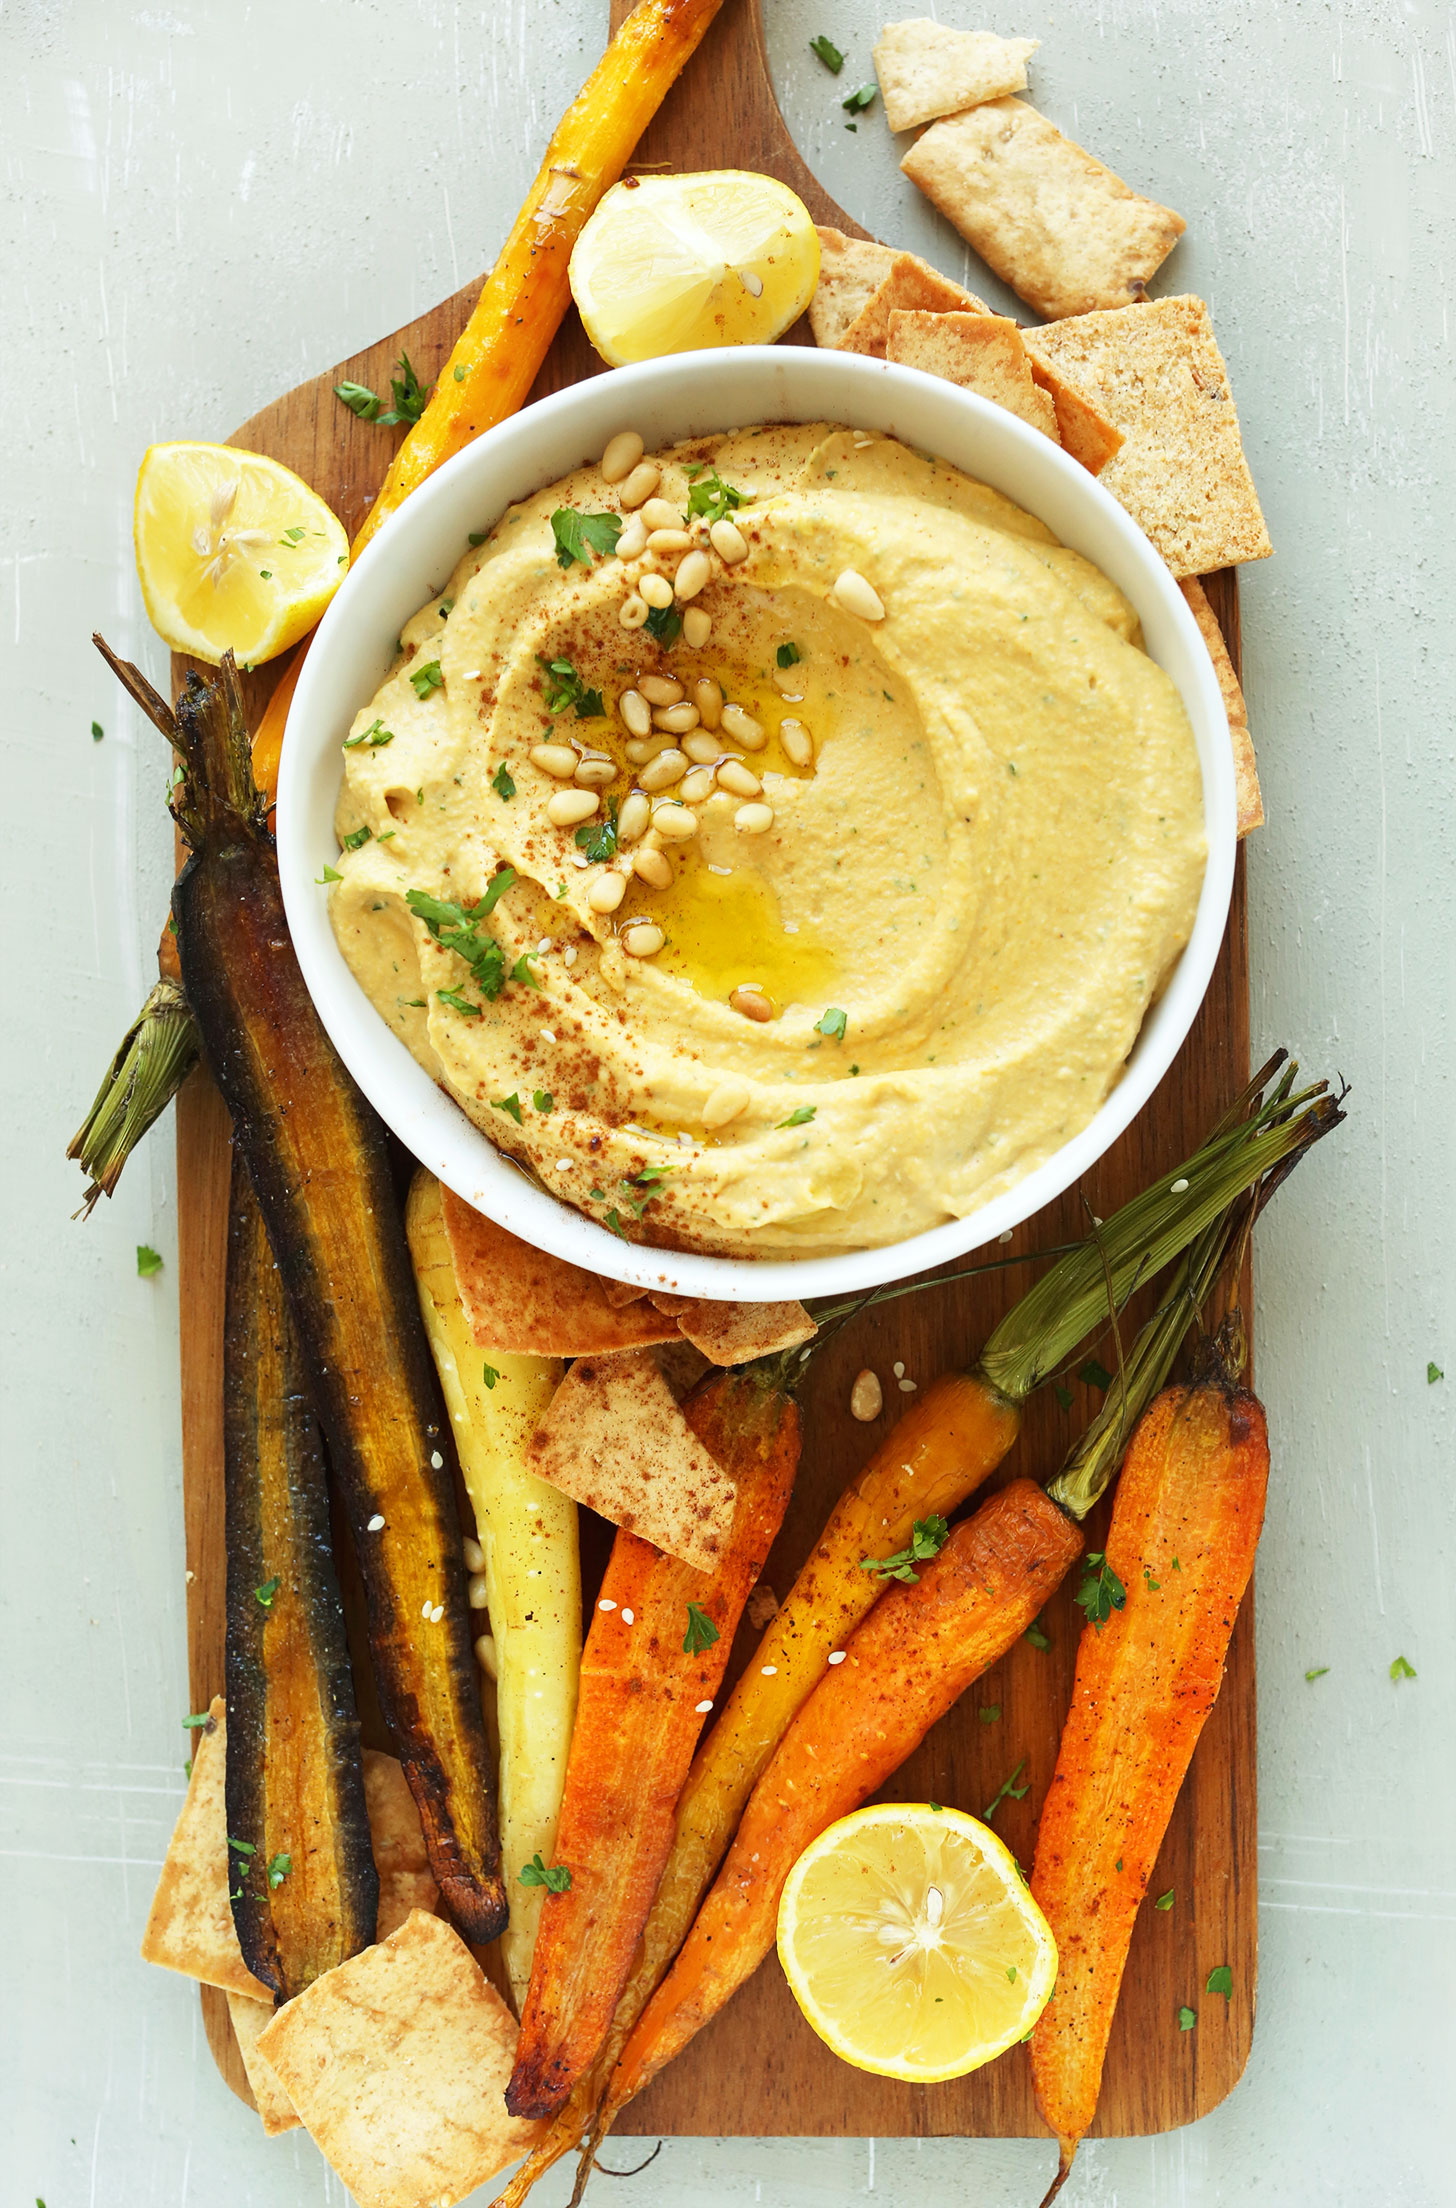 Wood platter with a bowl of gluten-free vegan Butternut Squash Hummus and goodies for dipping